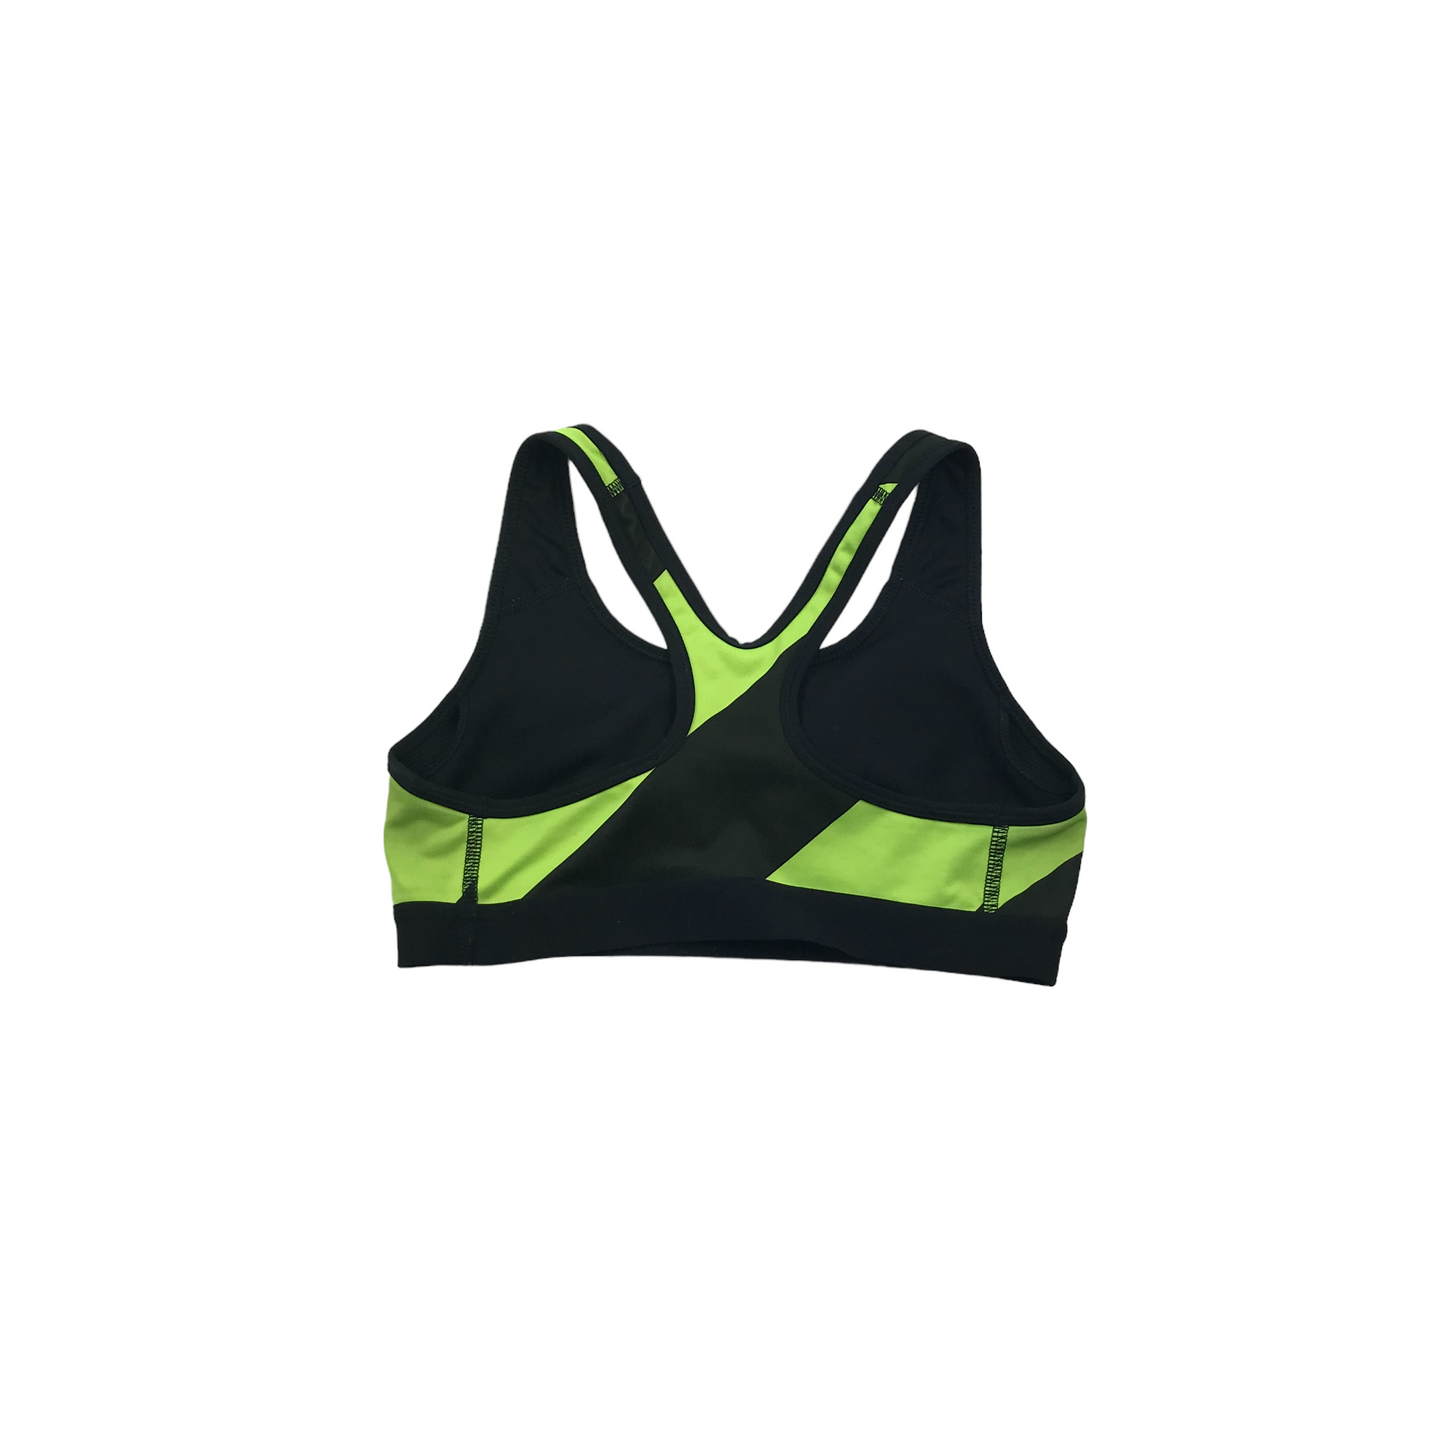 Nike Pro Black and Neon Padded Sports Crop Top Women's Size S